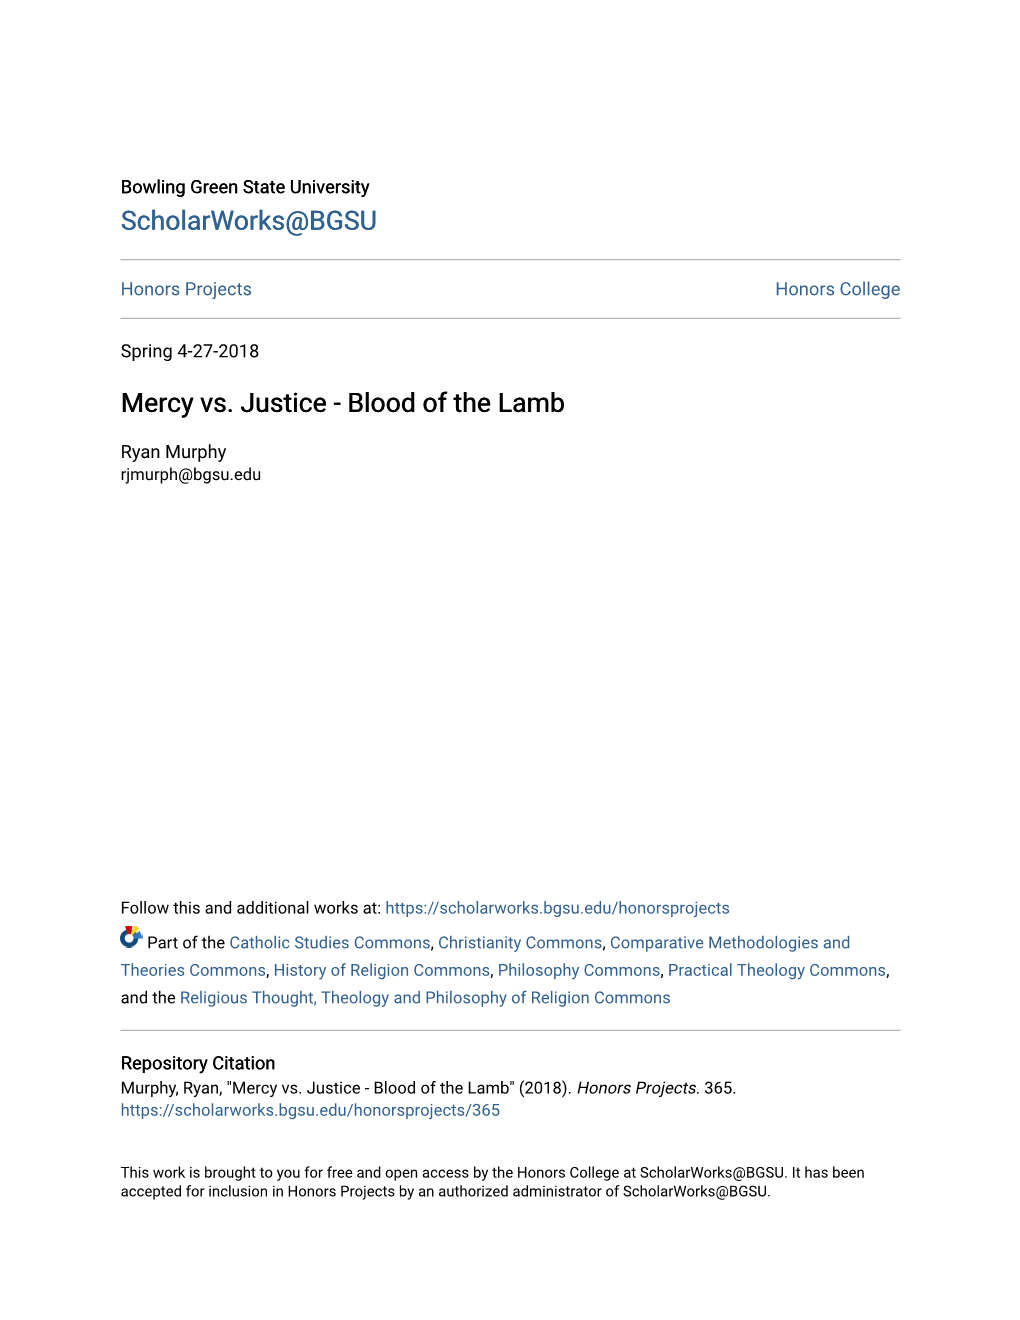 Mercy Vs. Justice - Blood of the Lamb